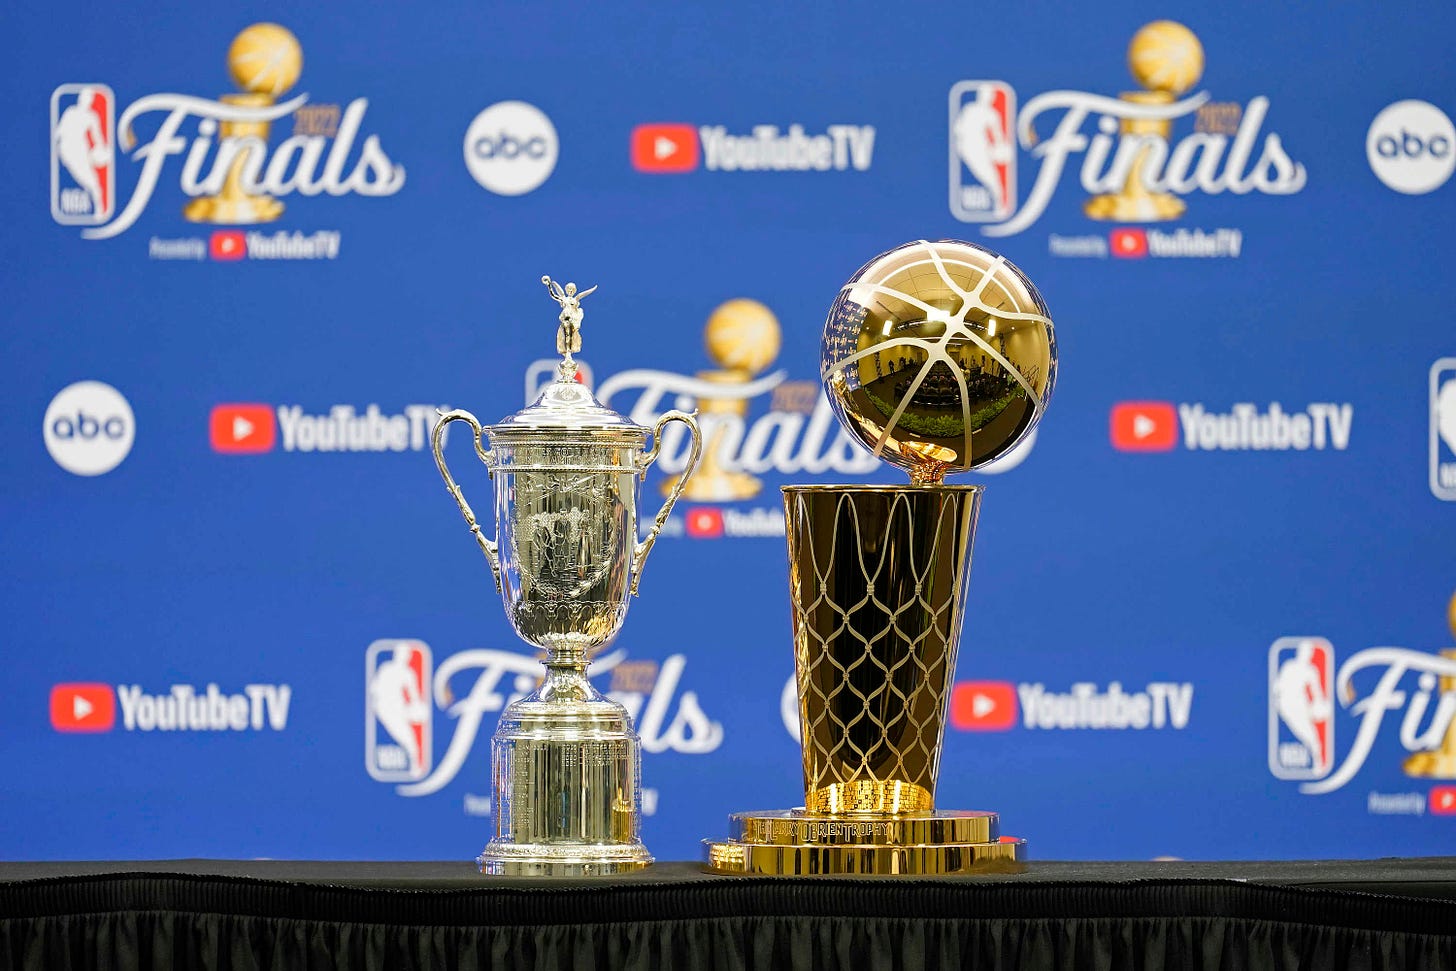 NBA finals sees ESPN experiment with youth-focused live stream - SportsPro